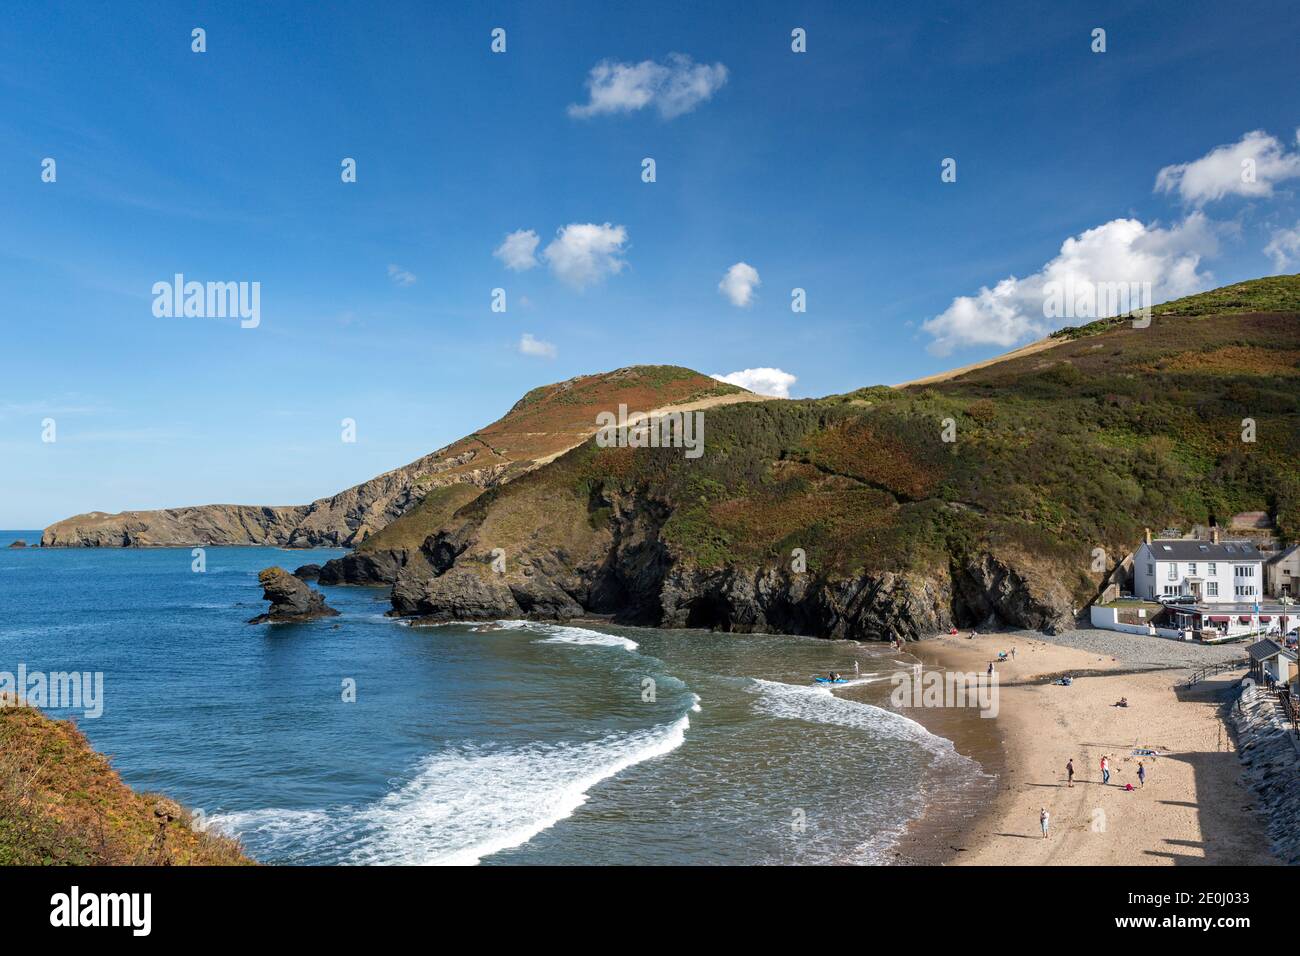 Llangrannog is a small, coastal village and seaside resort in Ceredigion, seven miles south of New Quay on the Wales Coast Path. Stock Photo